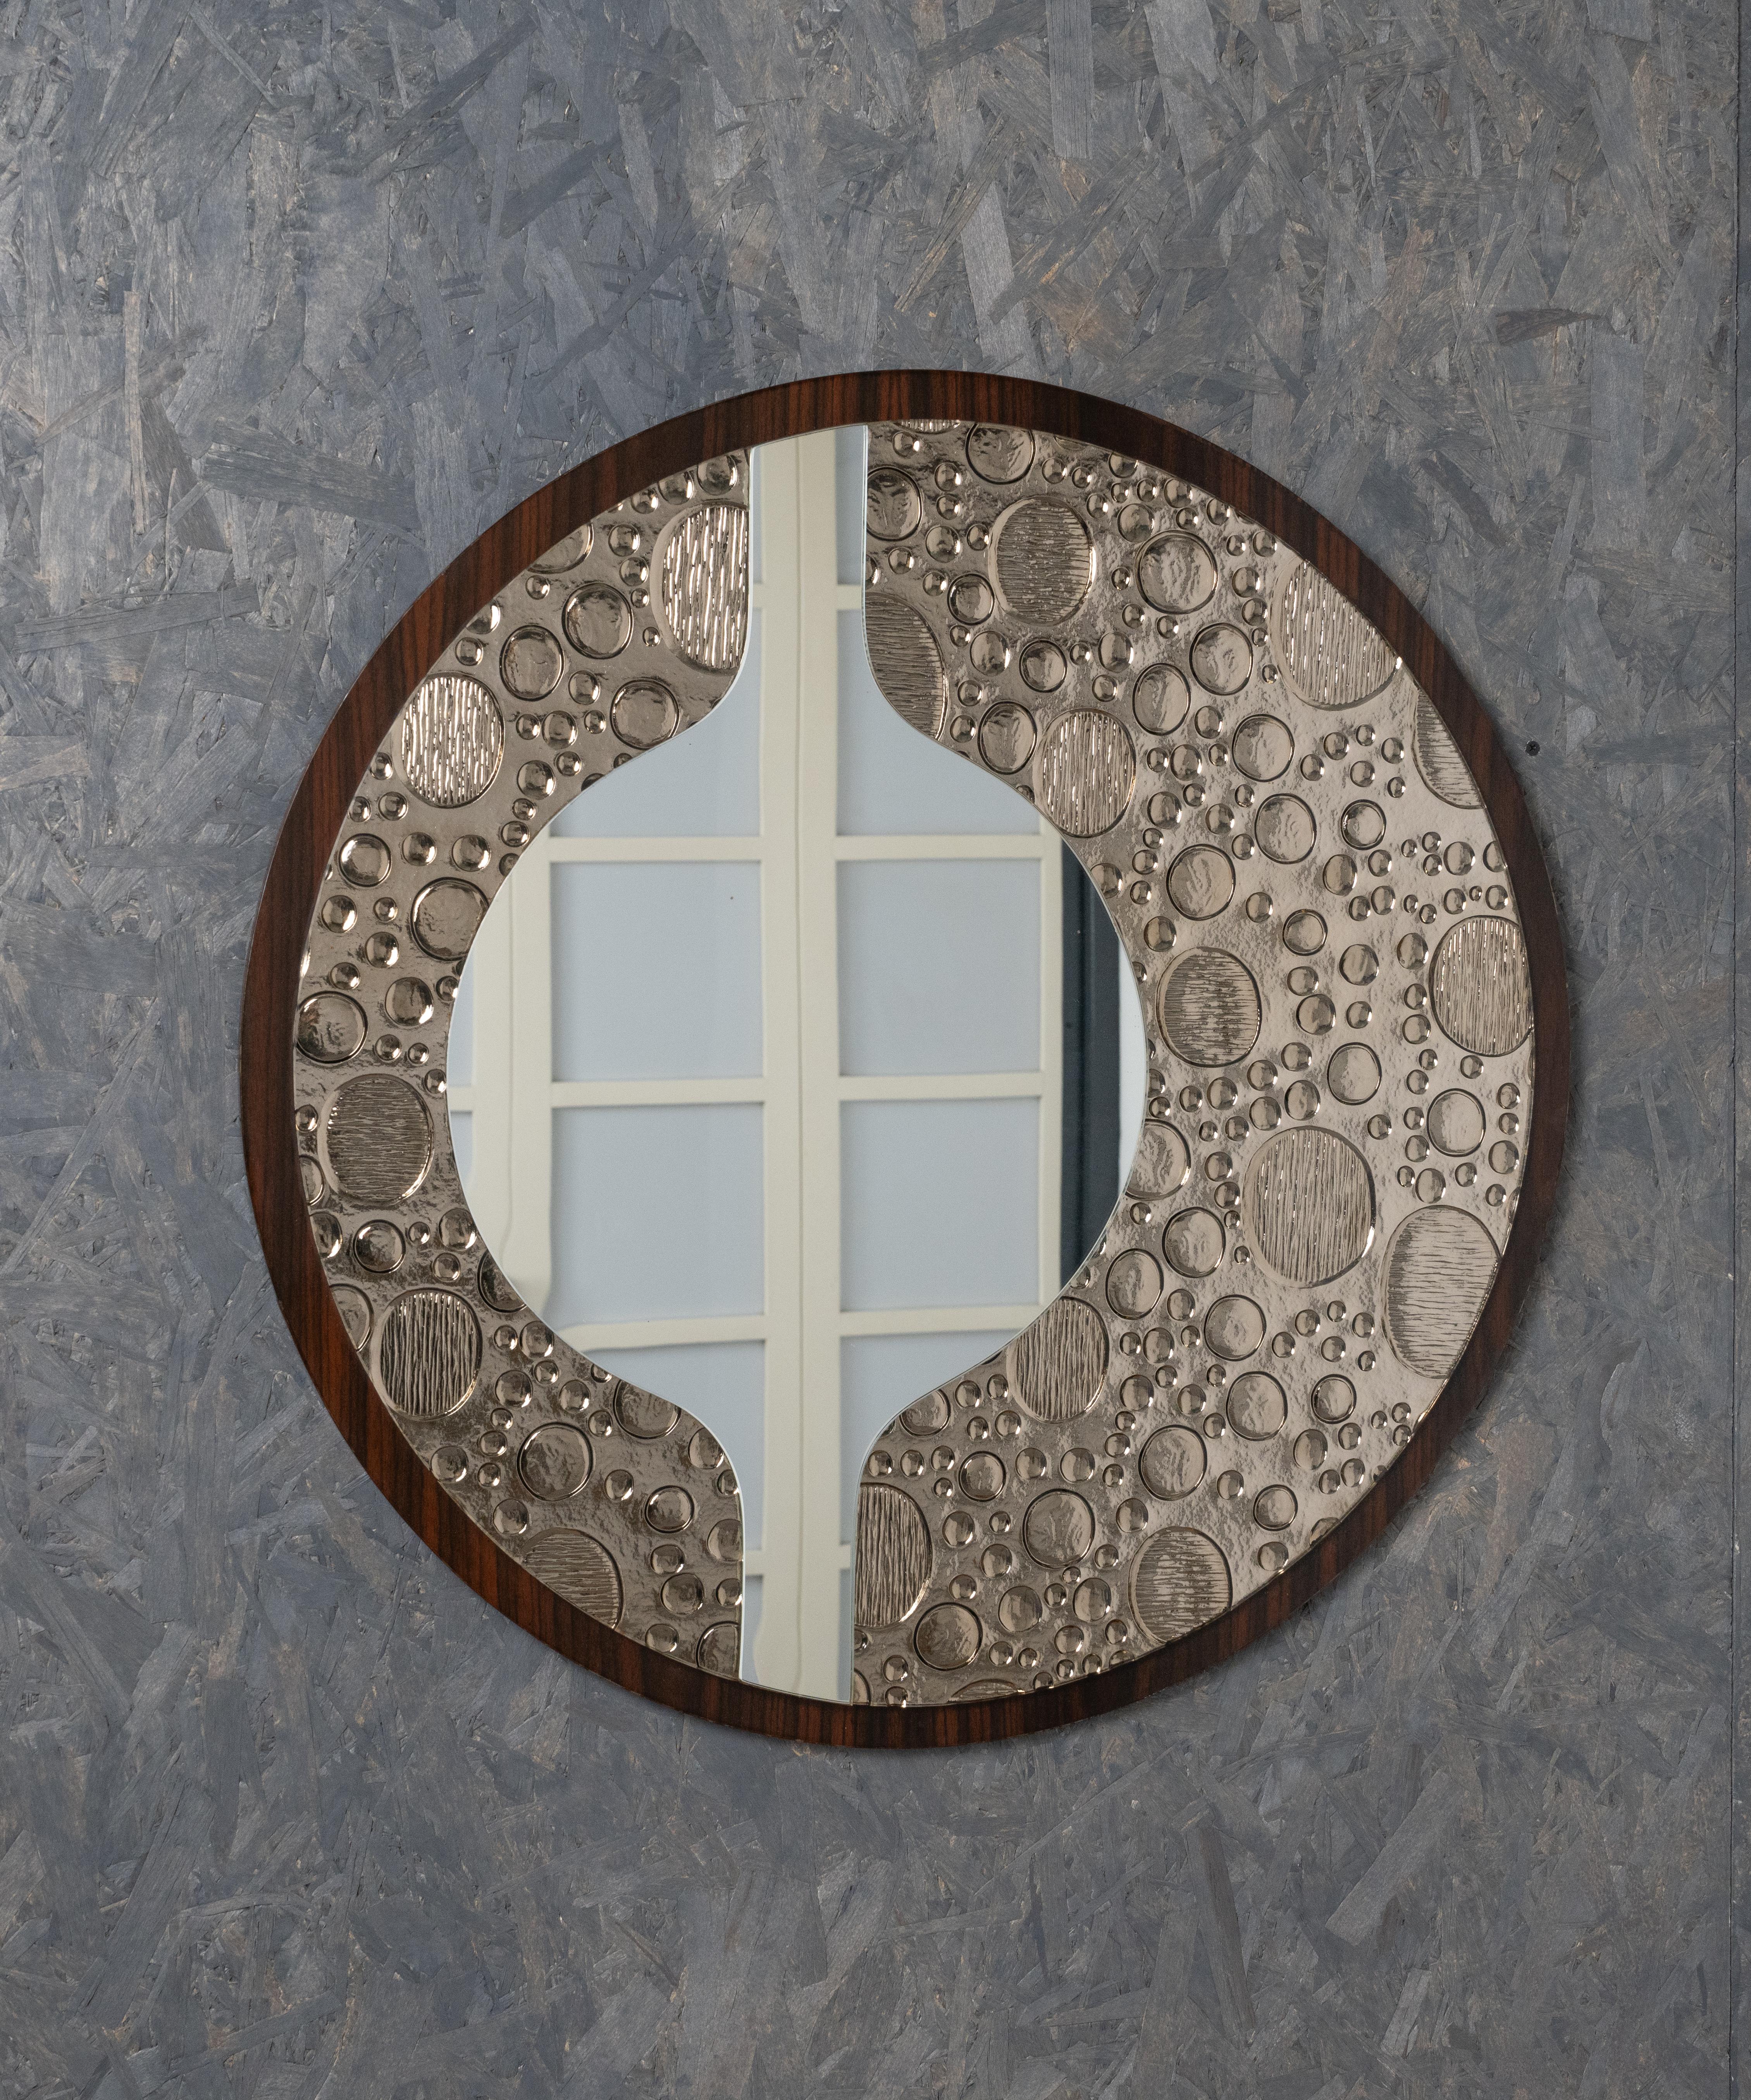 Midcentury Round Wall Mirror in Wood and Glass, Italy 1970s For Sale 6